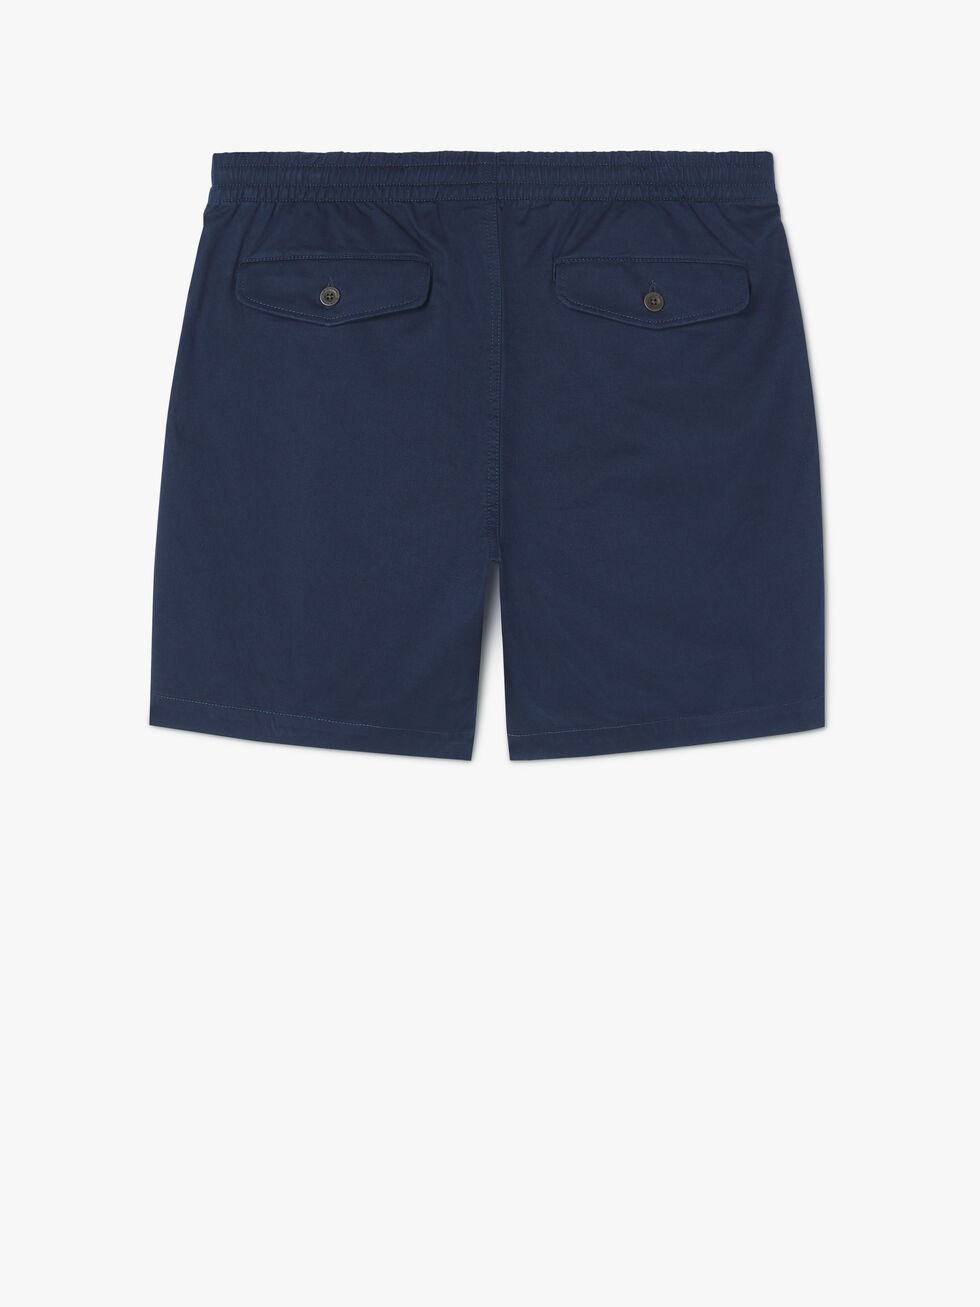 RM Williams Rugby Shorts - Ink | Port Phillip Shop